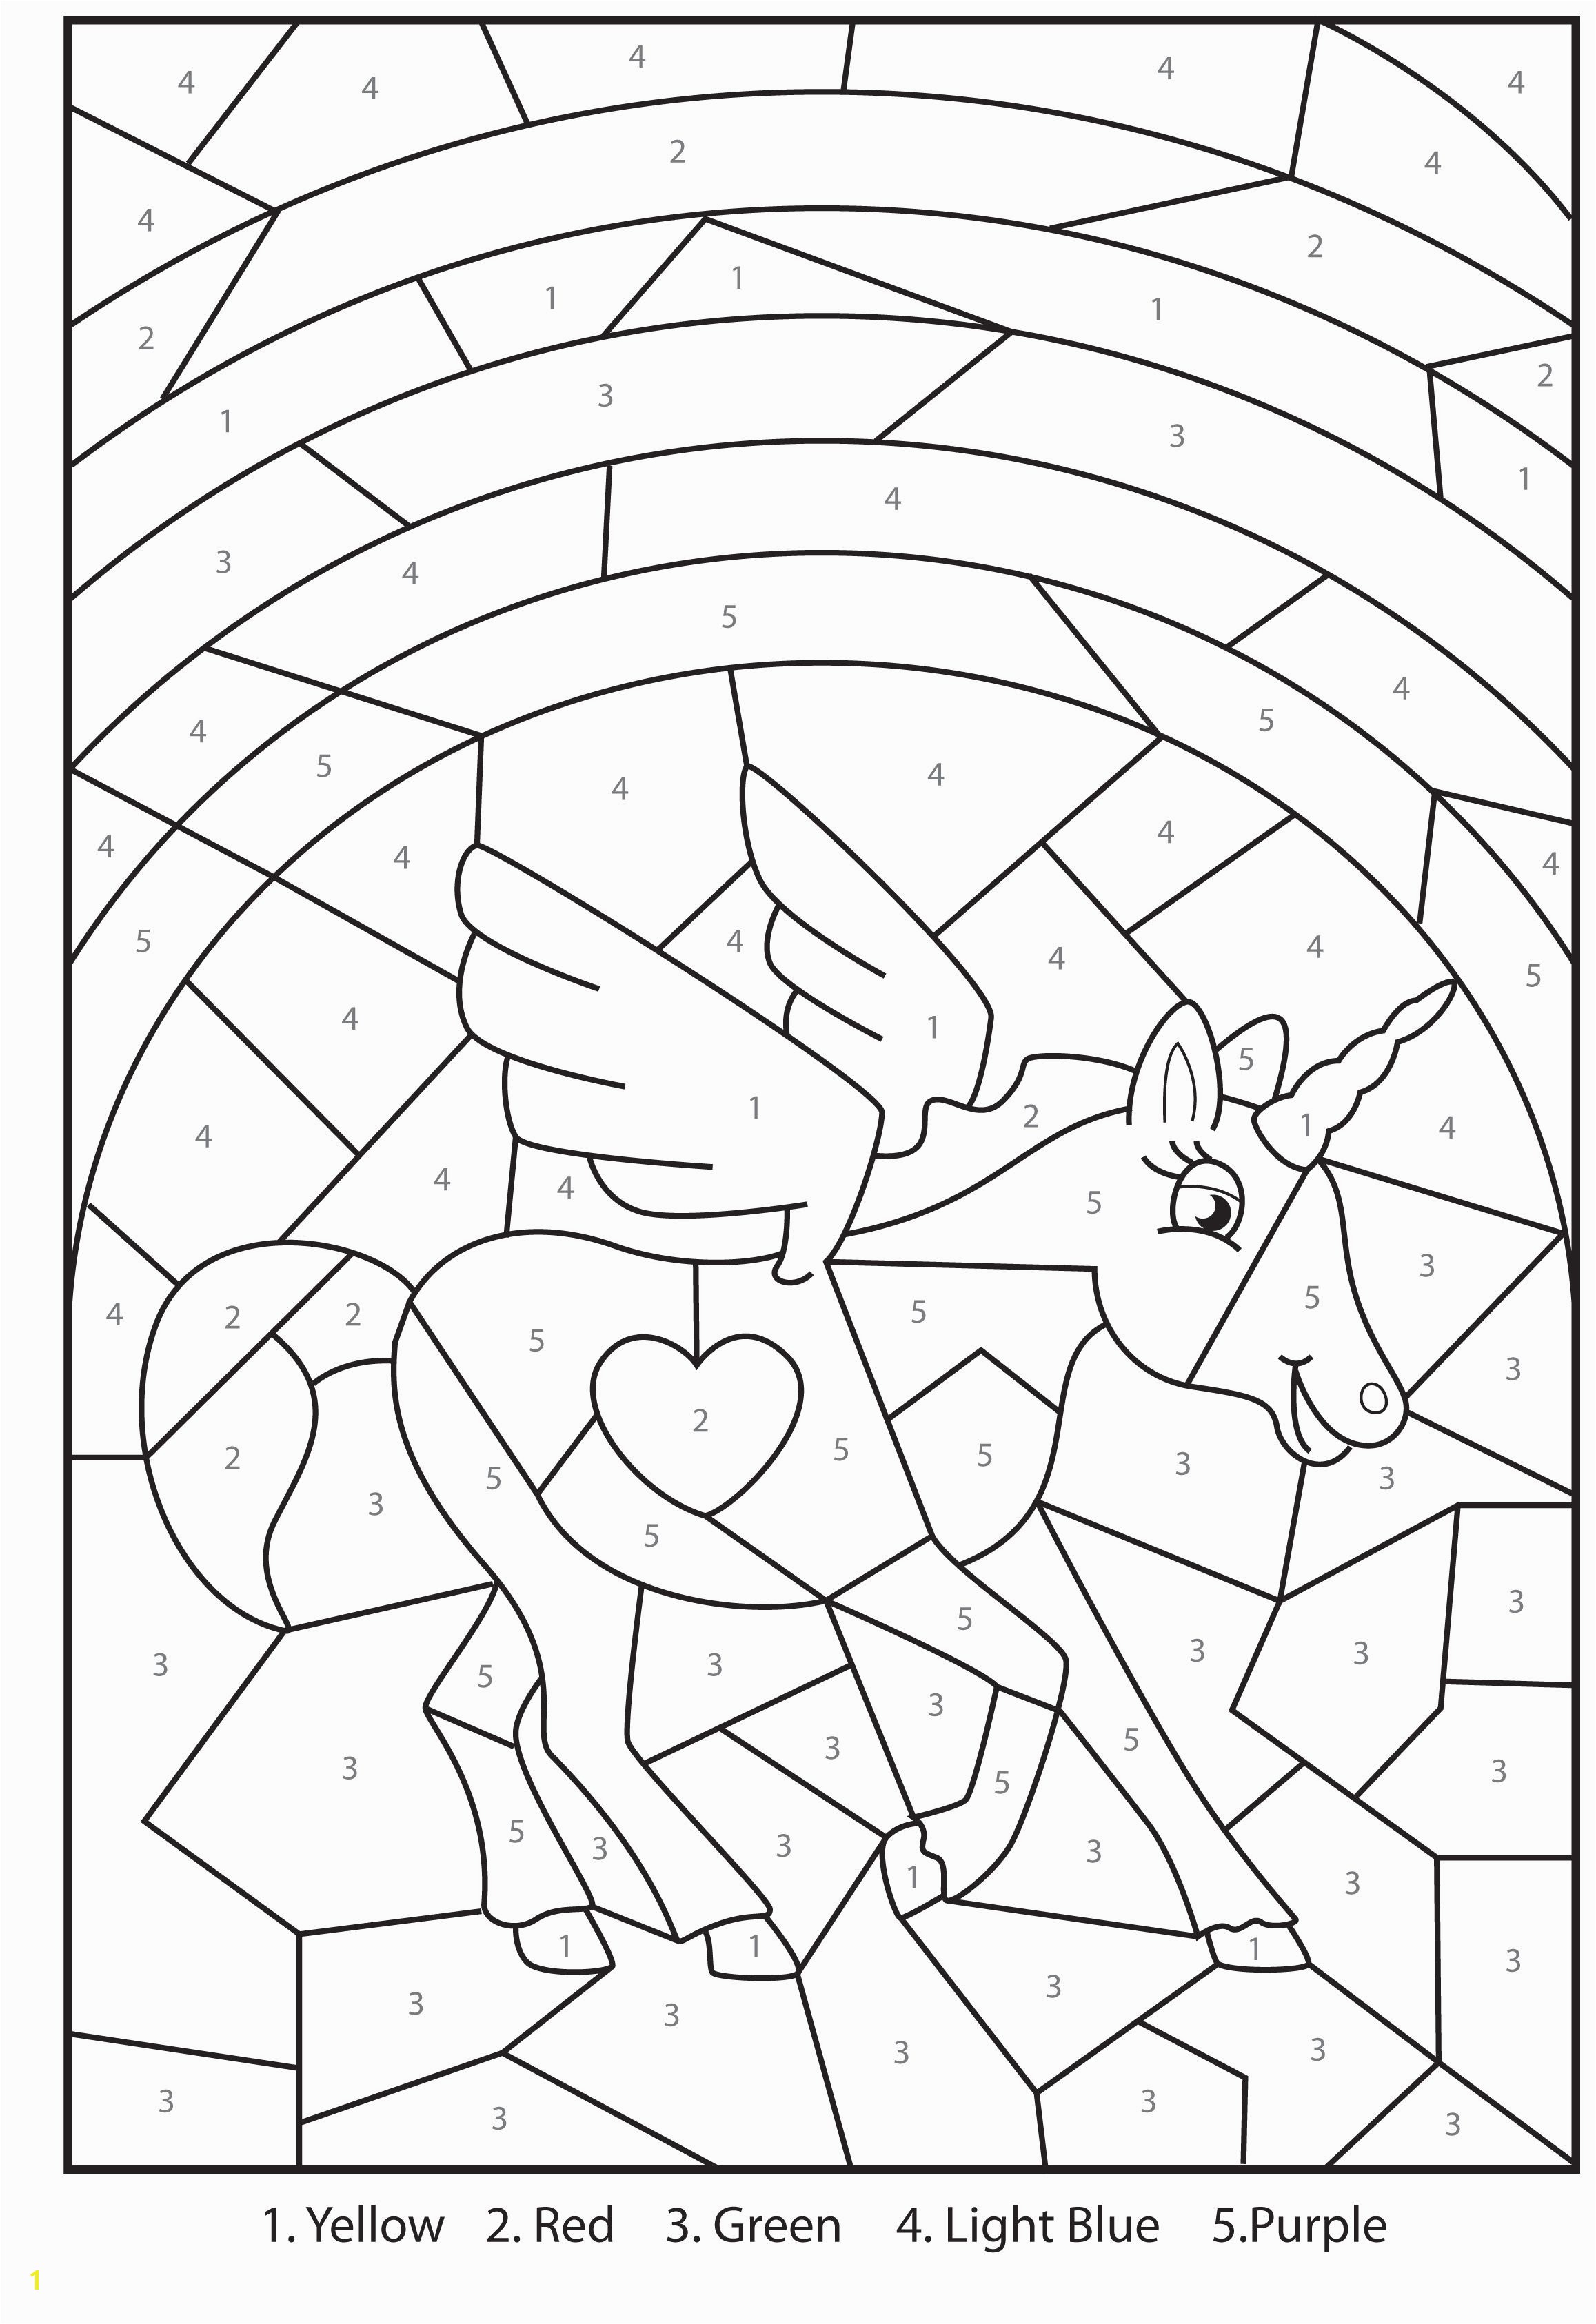 Coloring Pages for Grade 4 Free Printable Magical Unicorn Colour by Numbers Activity for Kids